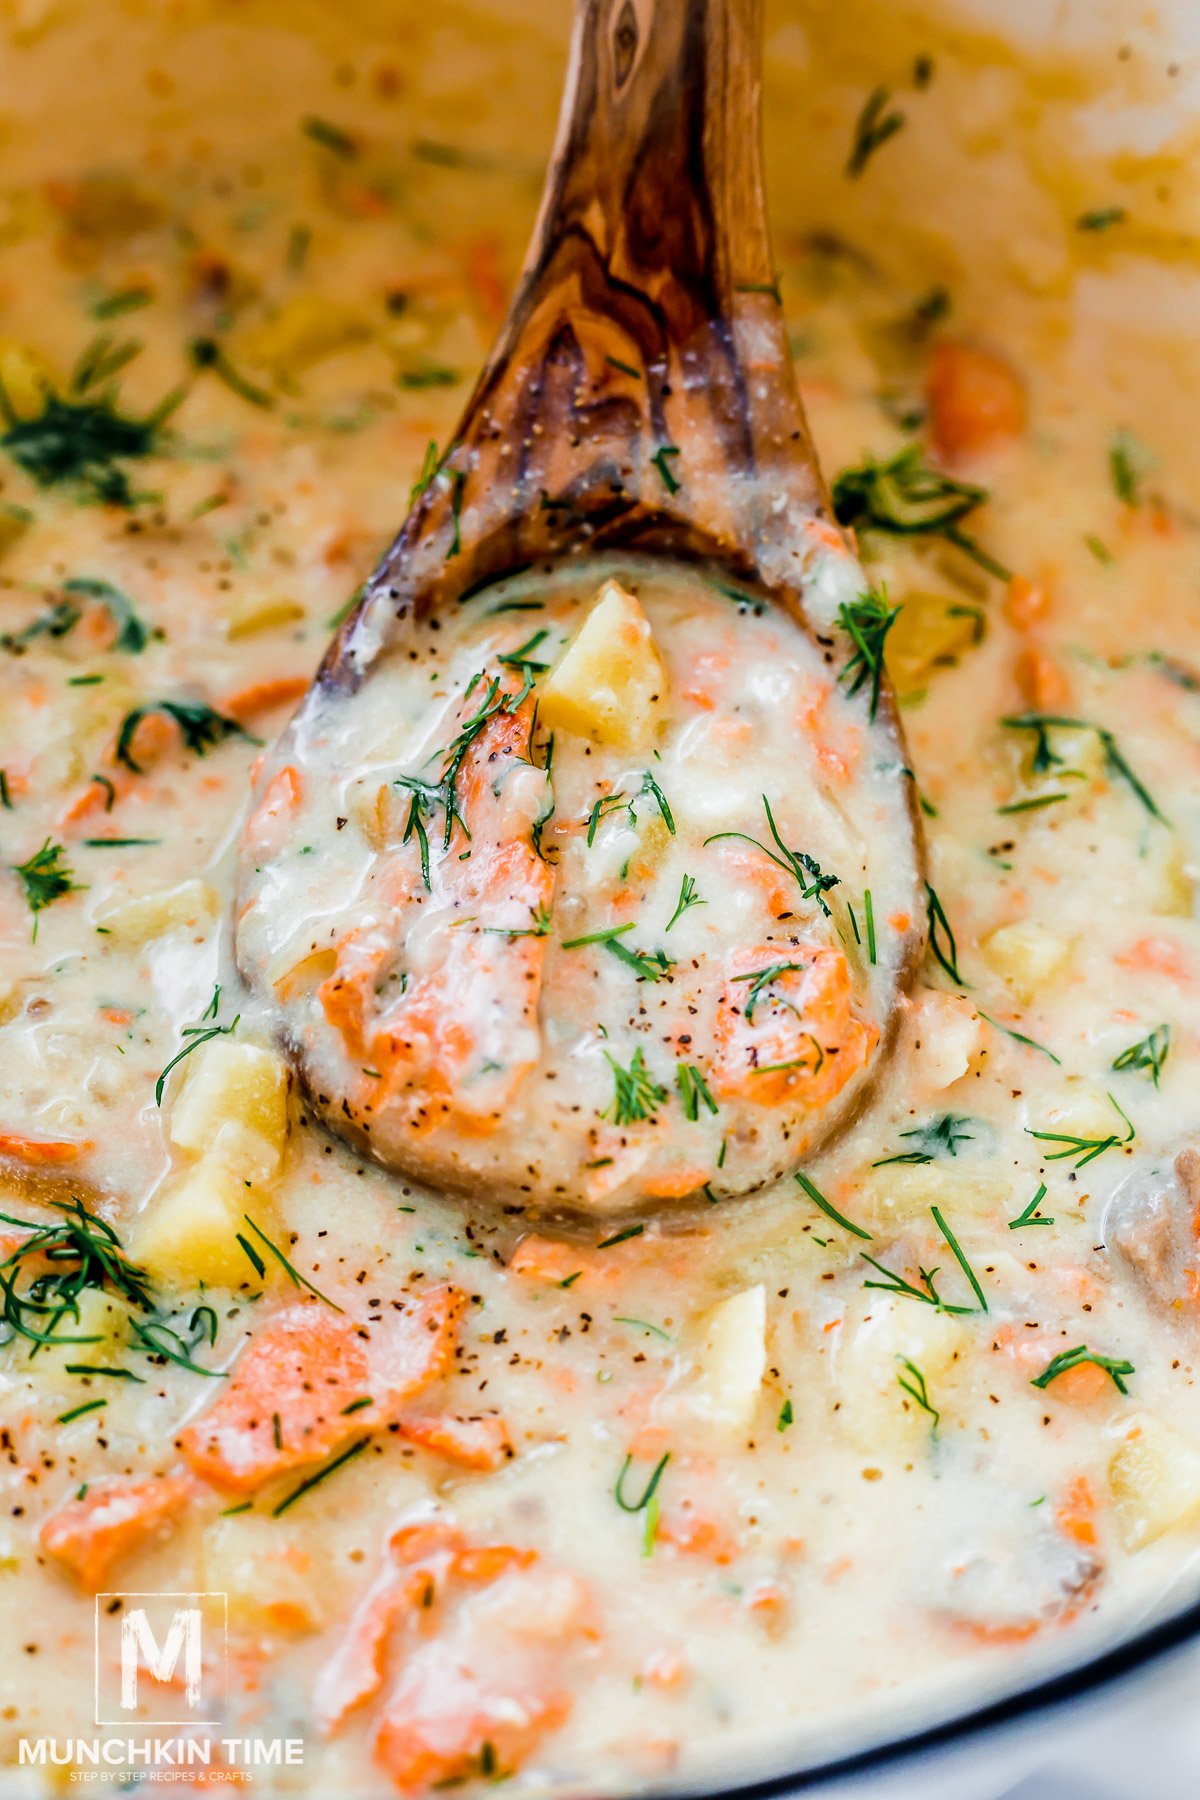 What to Serve with Salmon Chowder